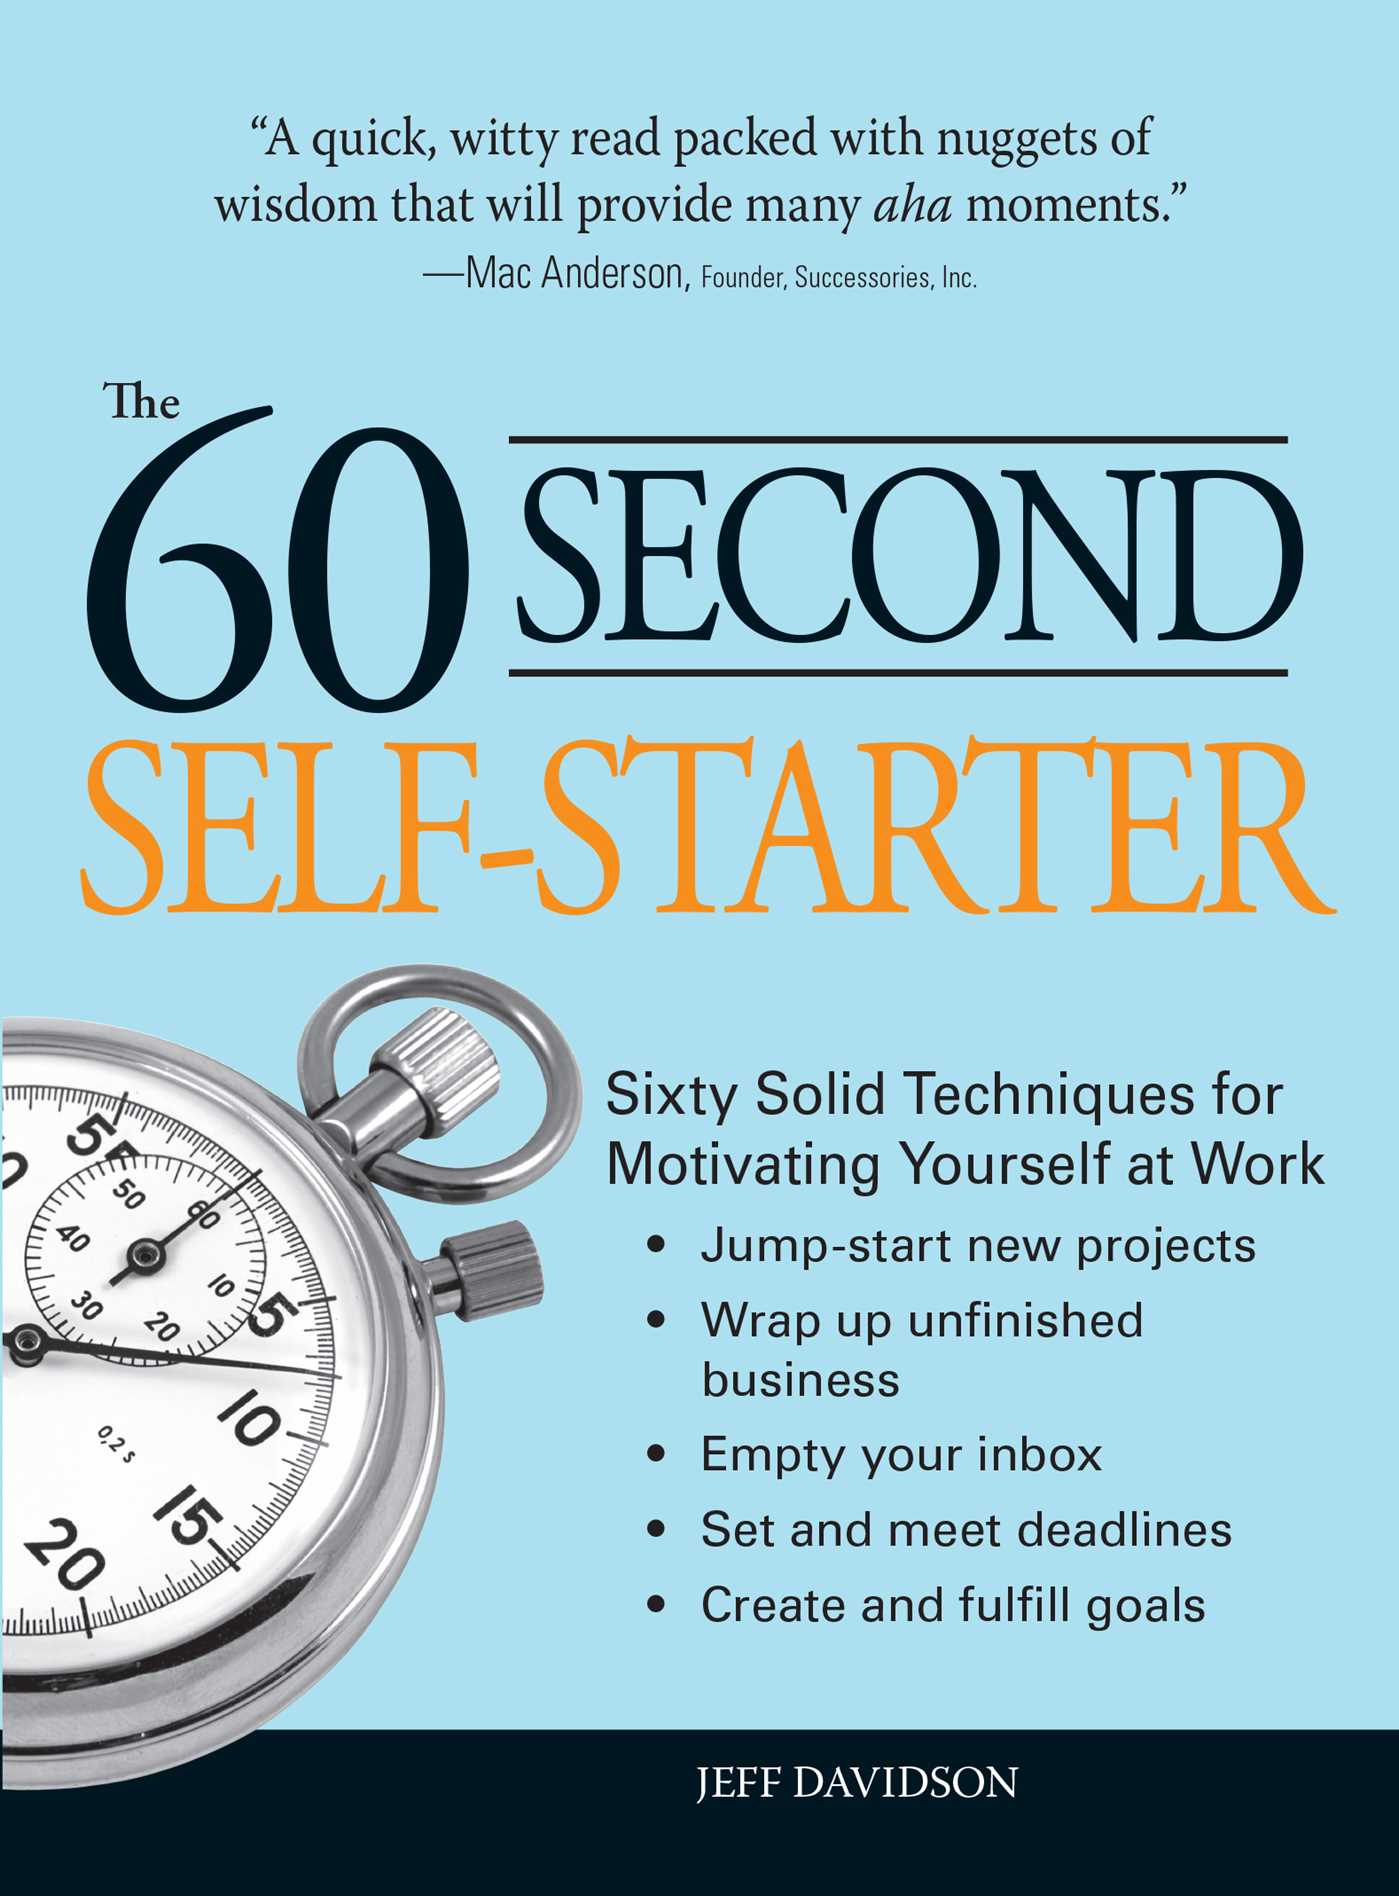 60 Second Self-Starter : Sixty Solid Techniques to get motivated, get organized, and get going in the workplace.